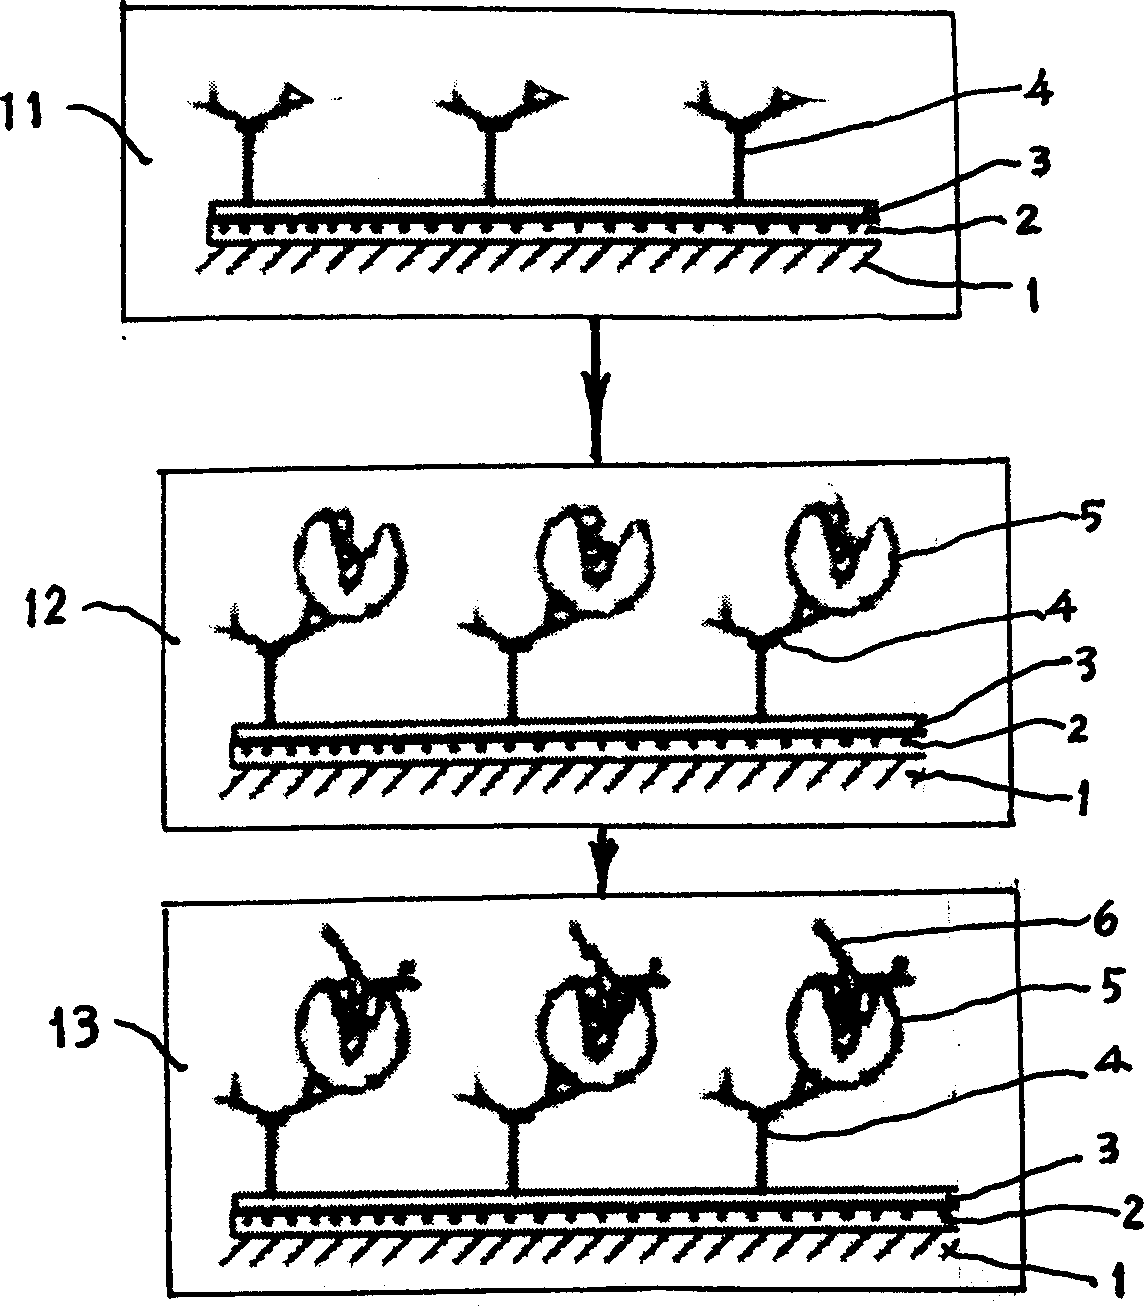 Method for detecting small molecule protein and peptides by using sandwich immunization sensing method